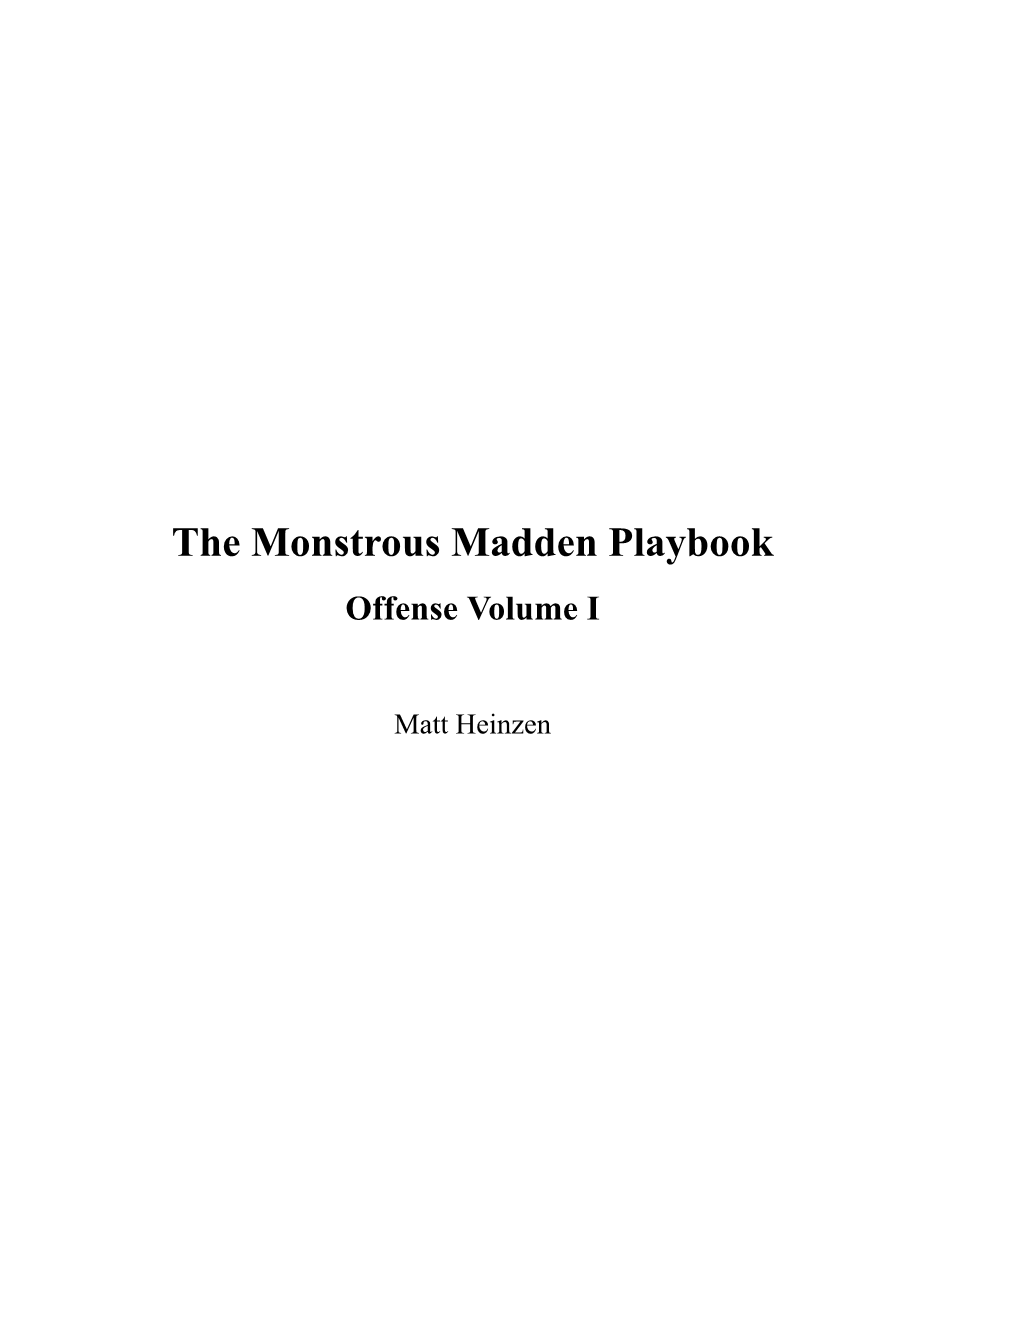 The Monstrous Madden Playbook Offense Volume I